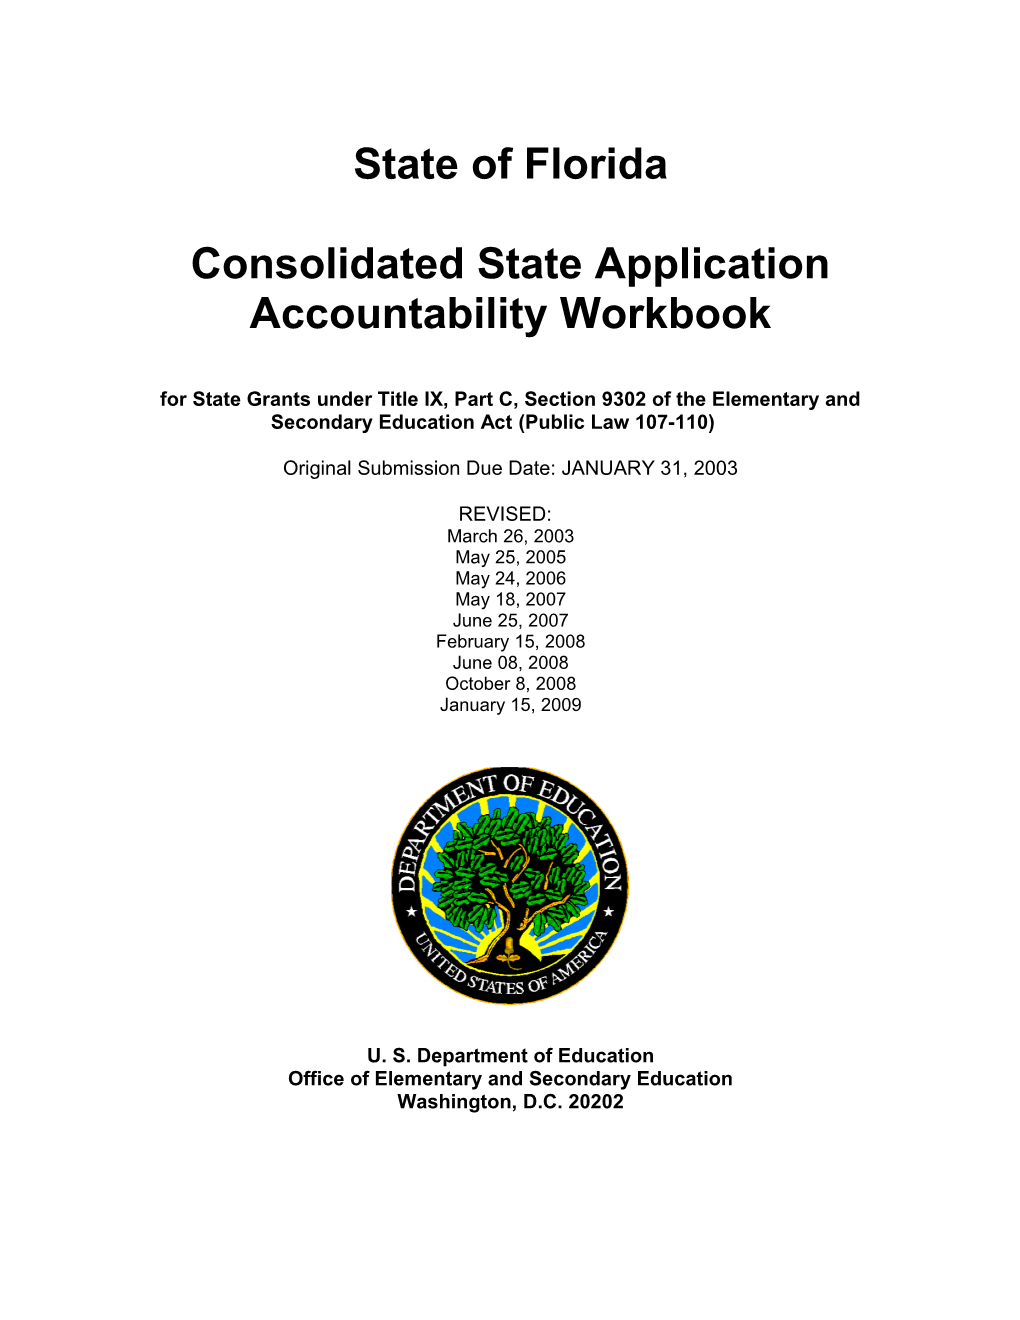 Florida Consolidated State Application Accountability Workbook (MS WORD)